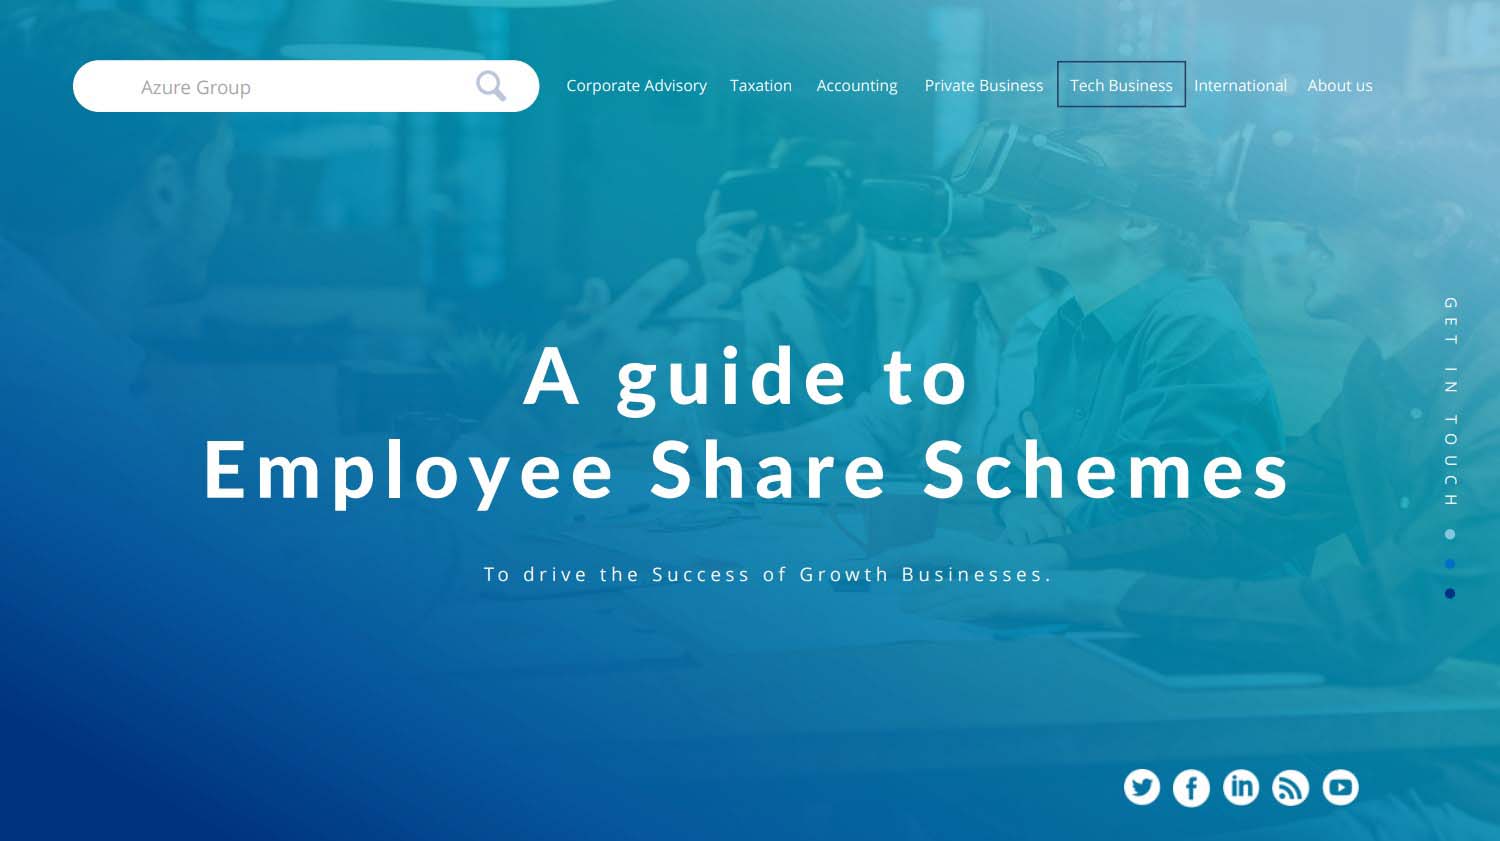 Your-downloadable-guide-to-ESS-ESOP-employee-share-scheme-azure-group